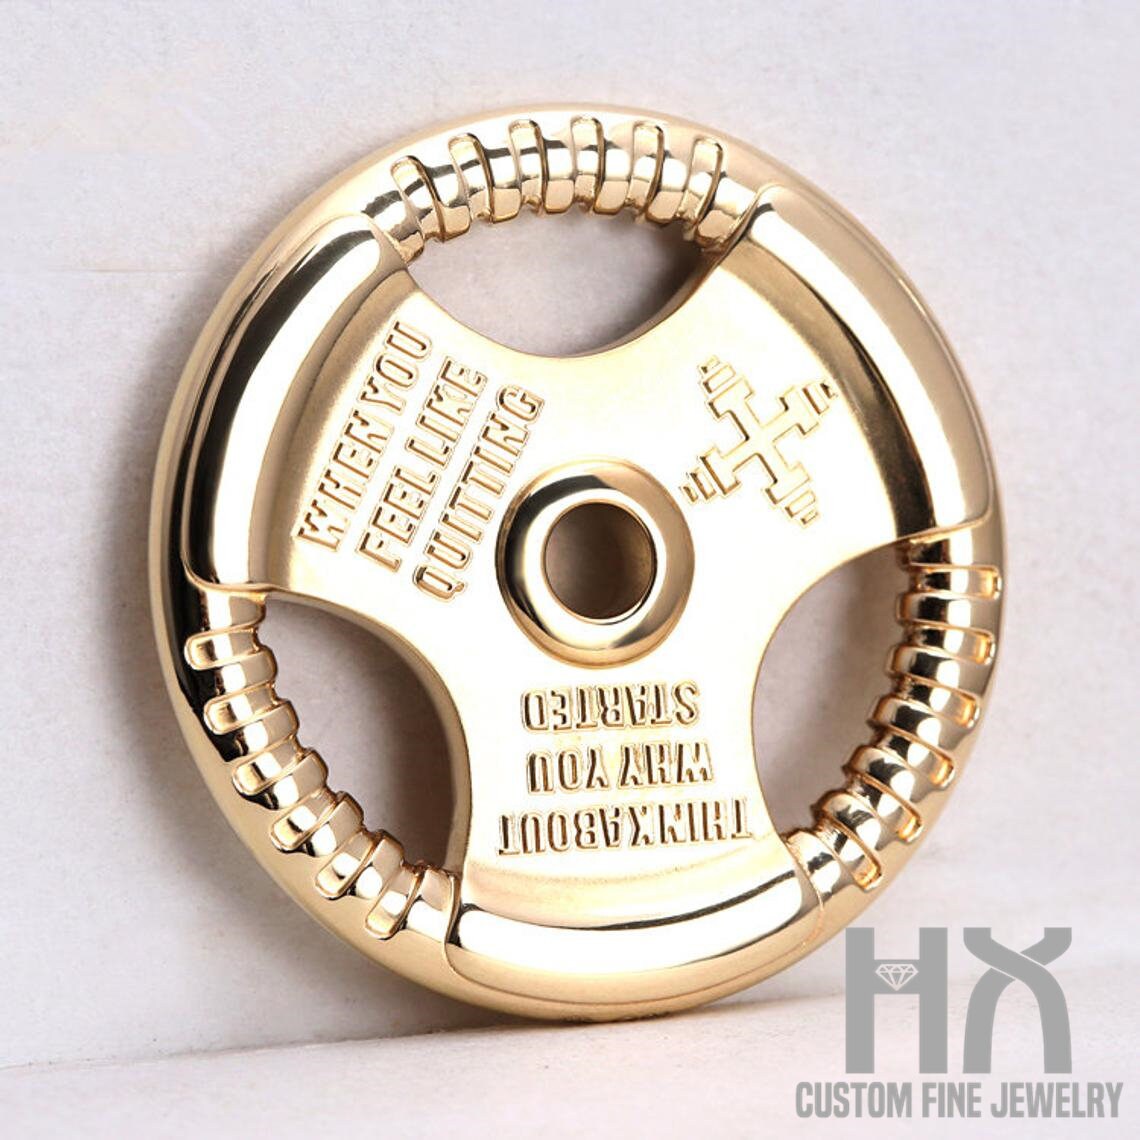 Solid 9K Gold Powerlifting Weight Plate/Hx Playful Accessory/Gym Fitness Jewelry/Custom Fine Jewelry/Personalization Design/Unique Gift